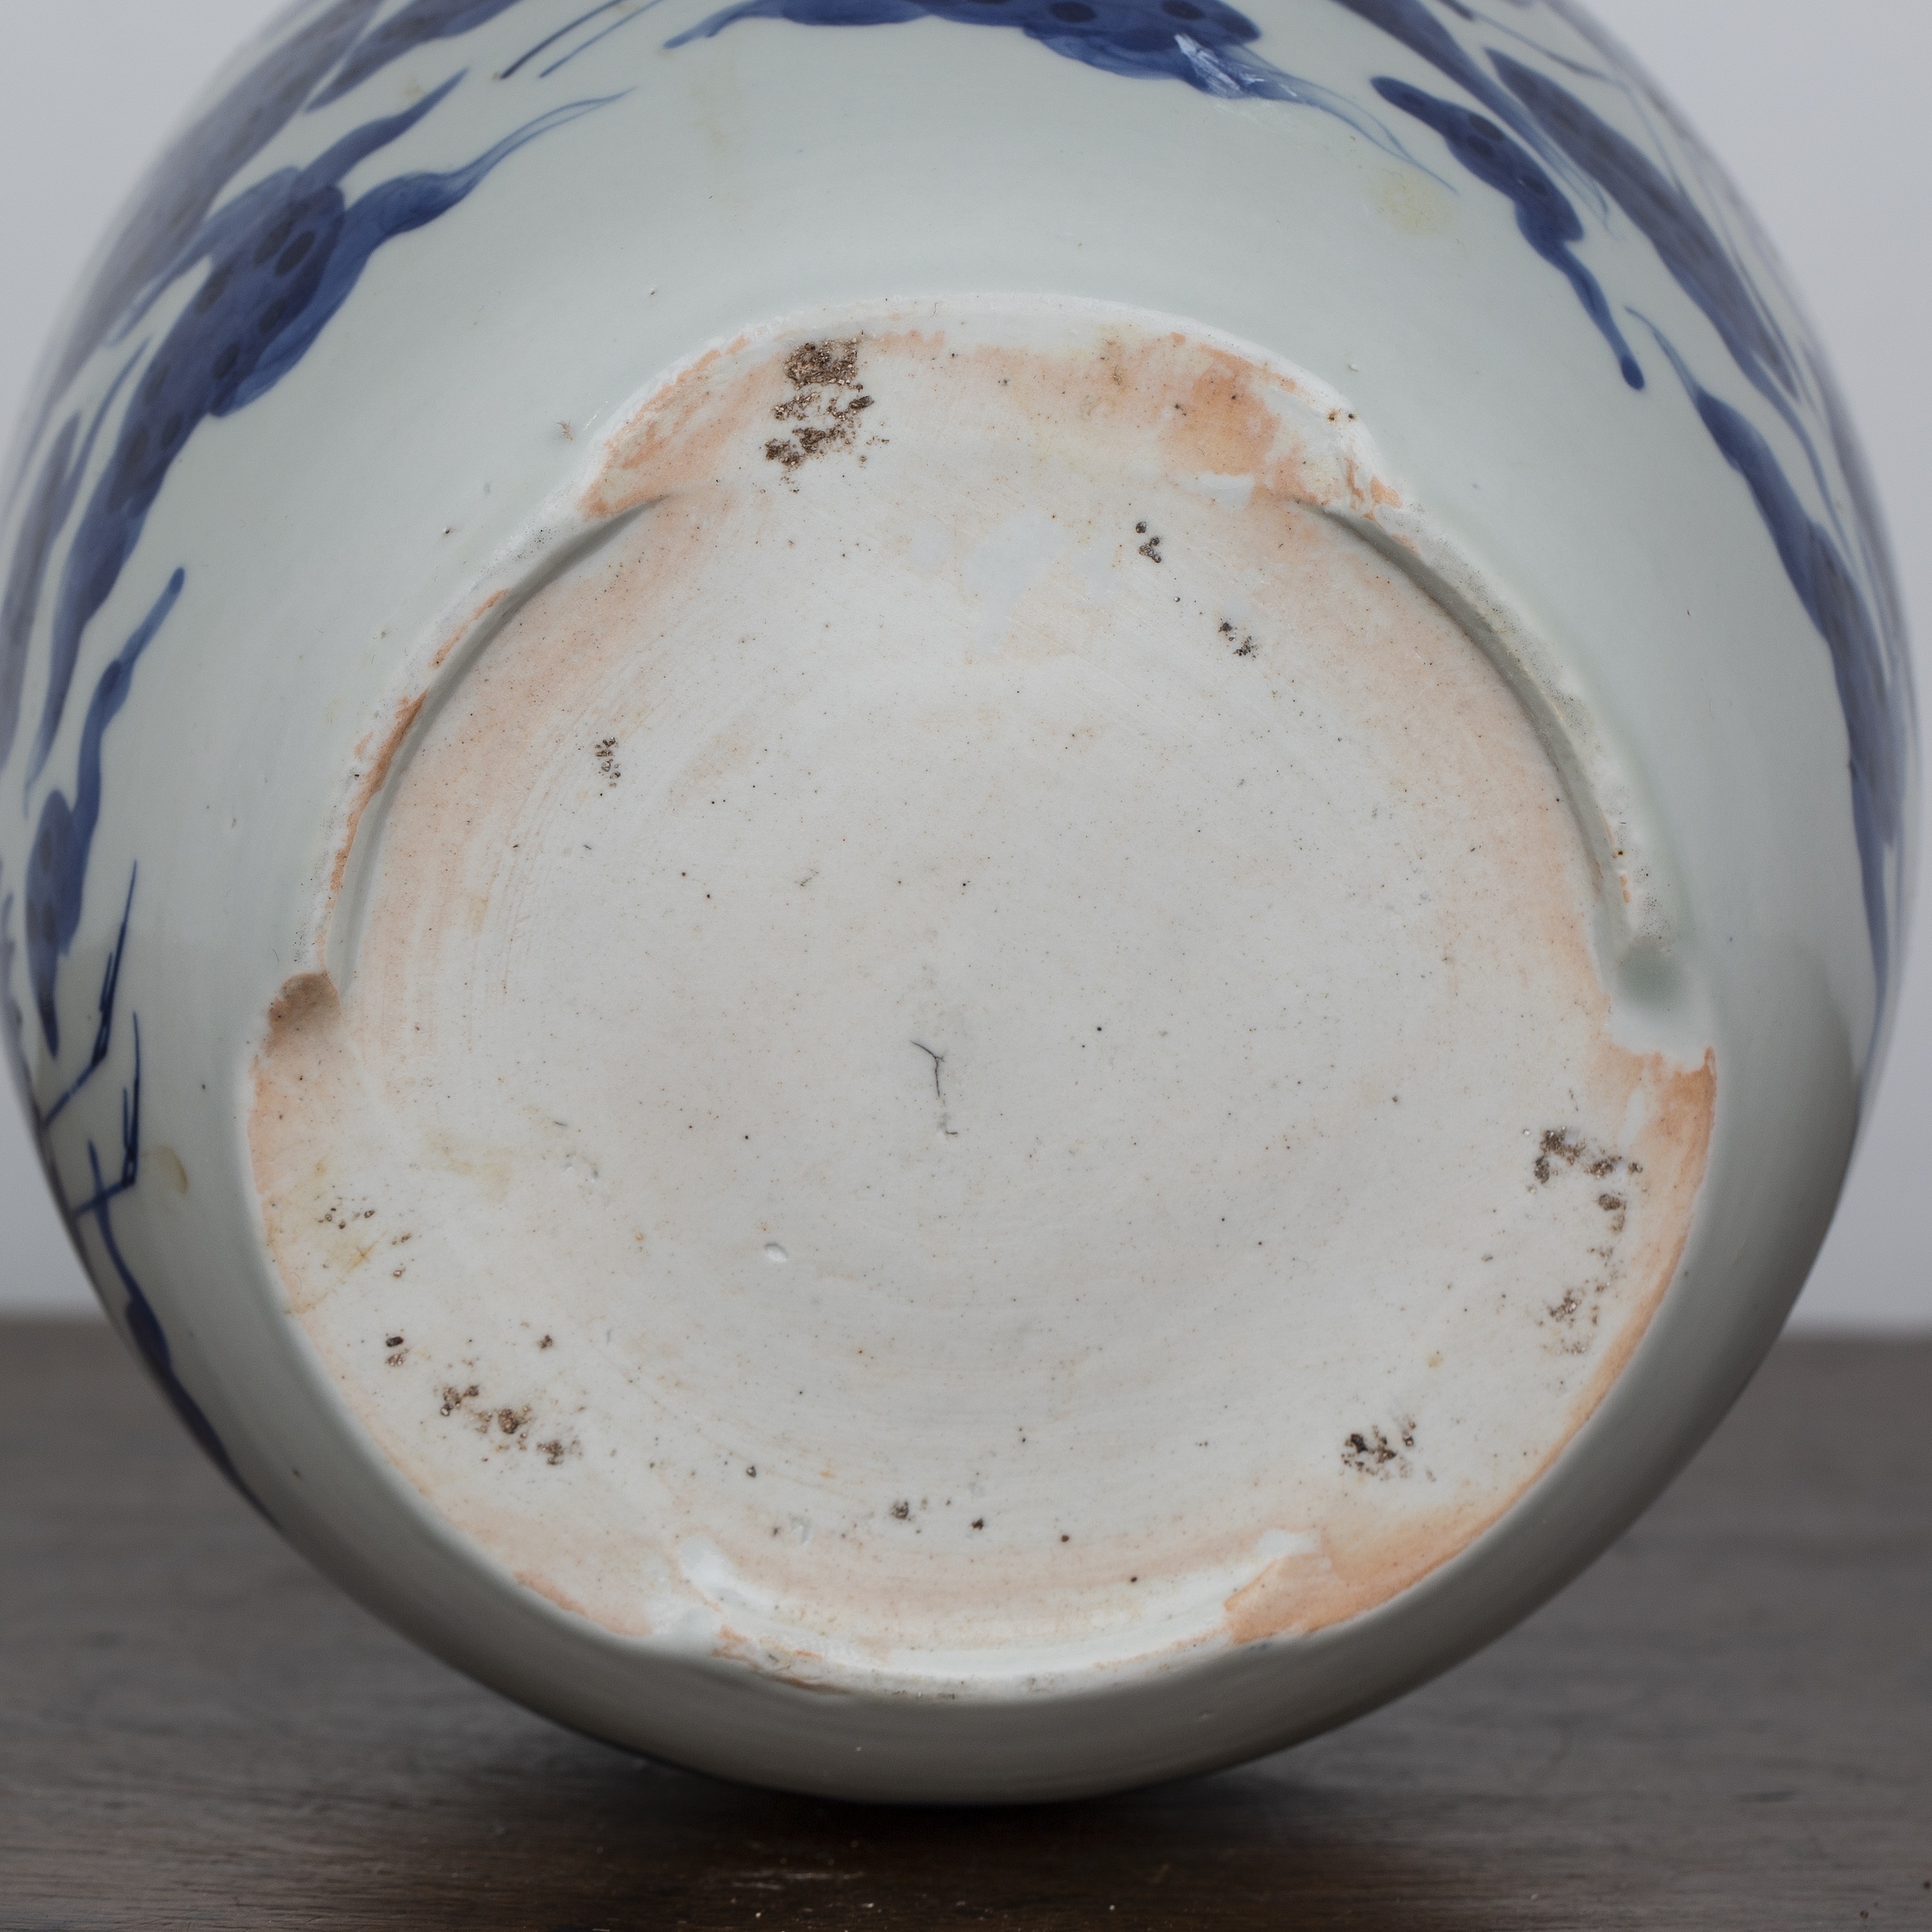 Blue and white porcelain jar Japanese painted with cranes in flight, 16.5cm high x 16.5cm diameter - Image 4 of 4